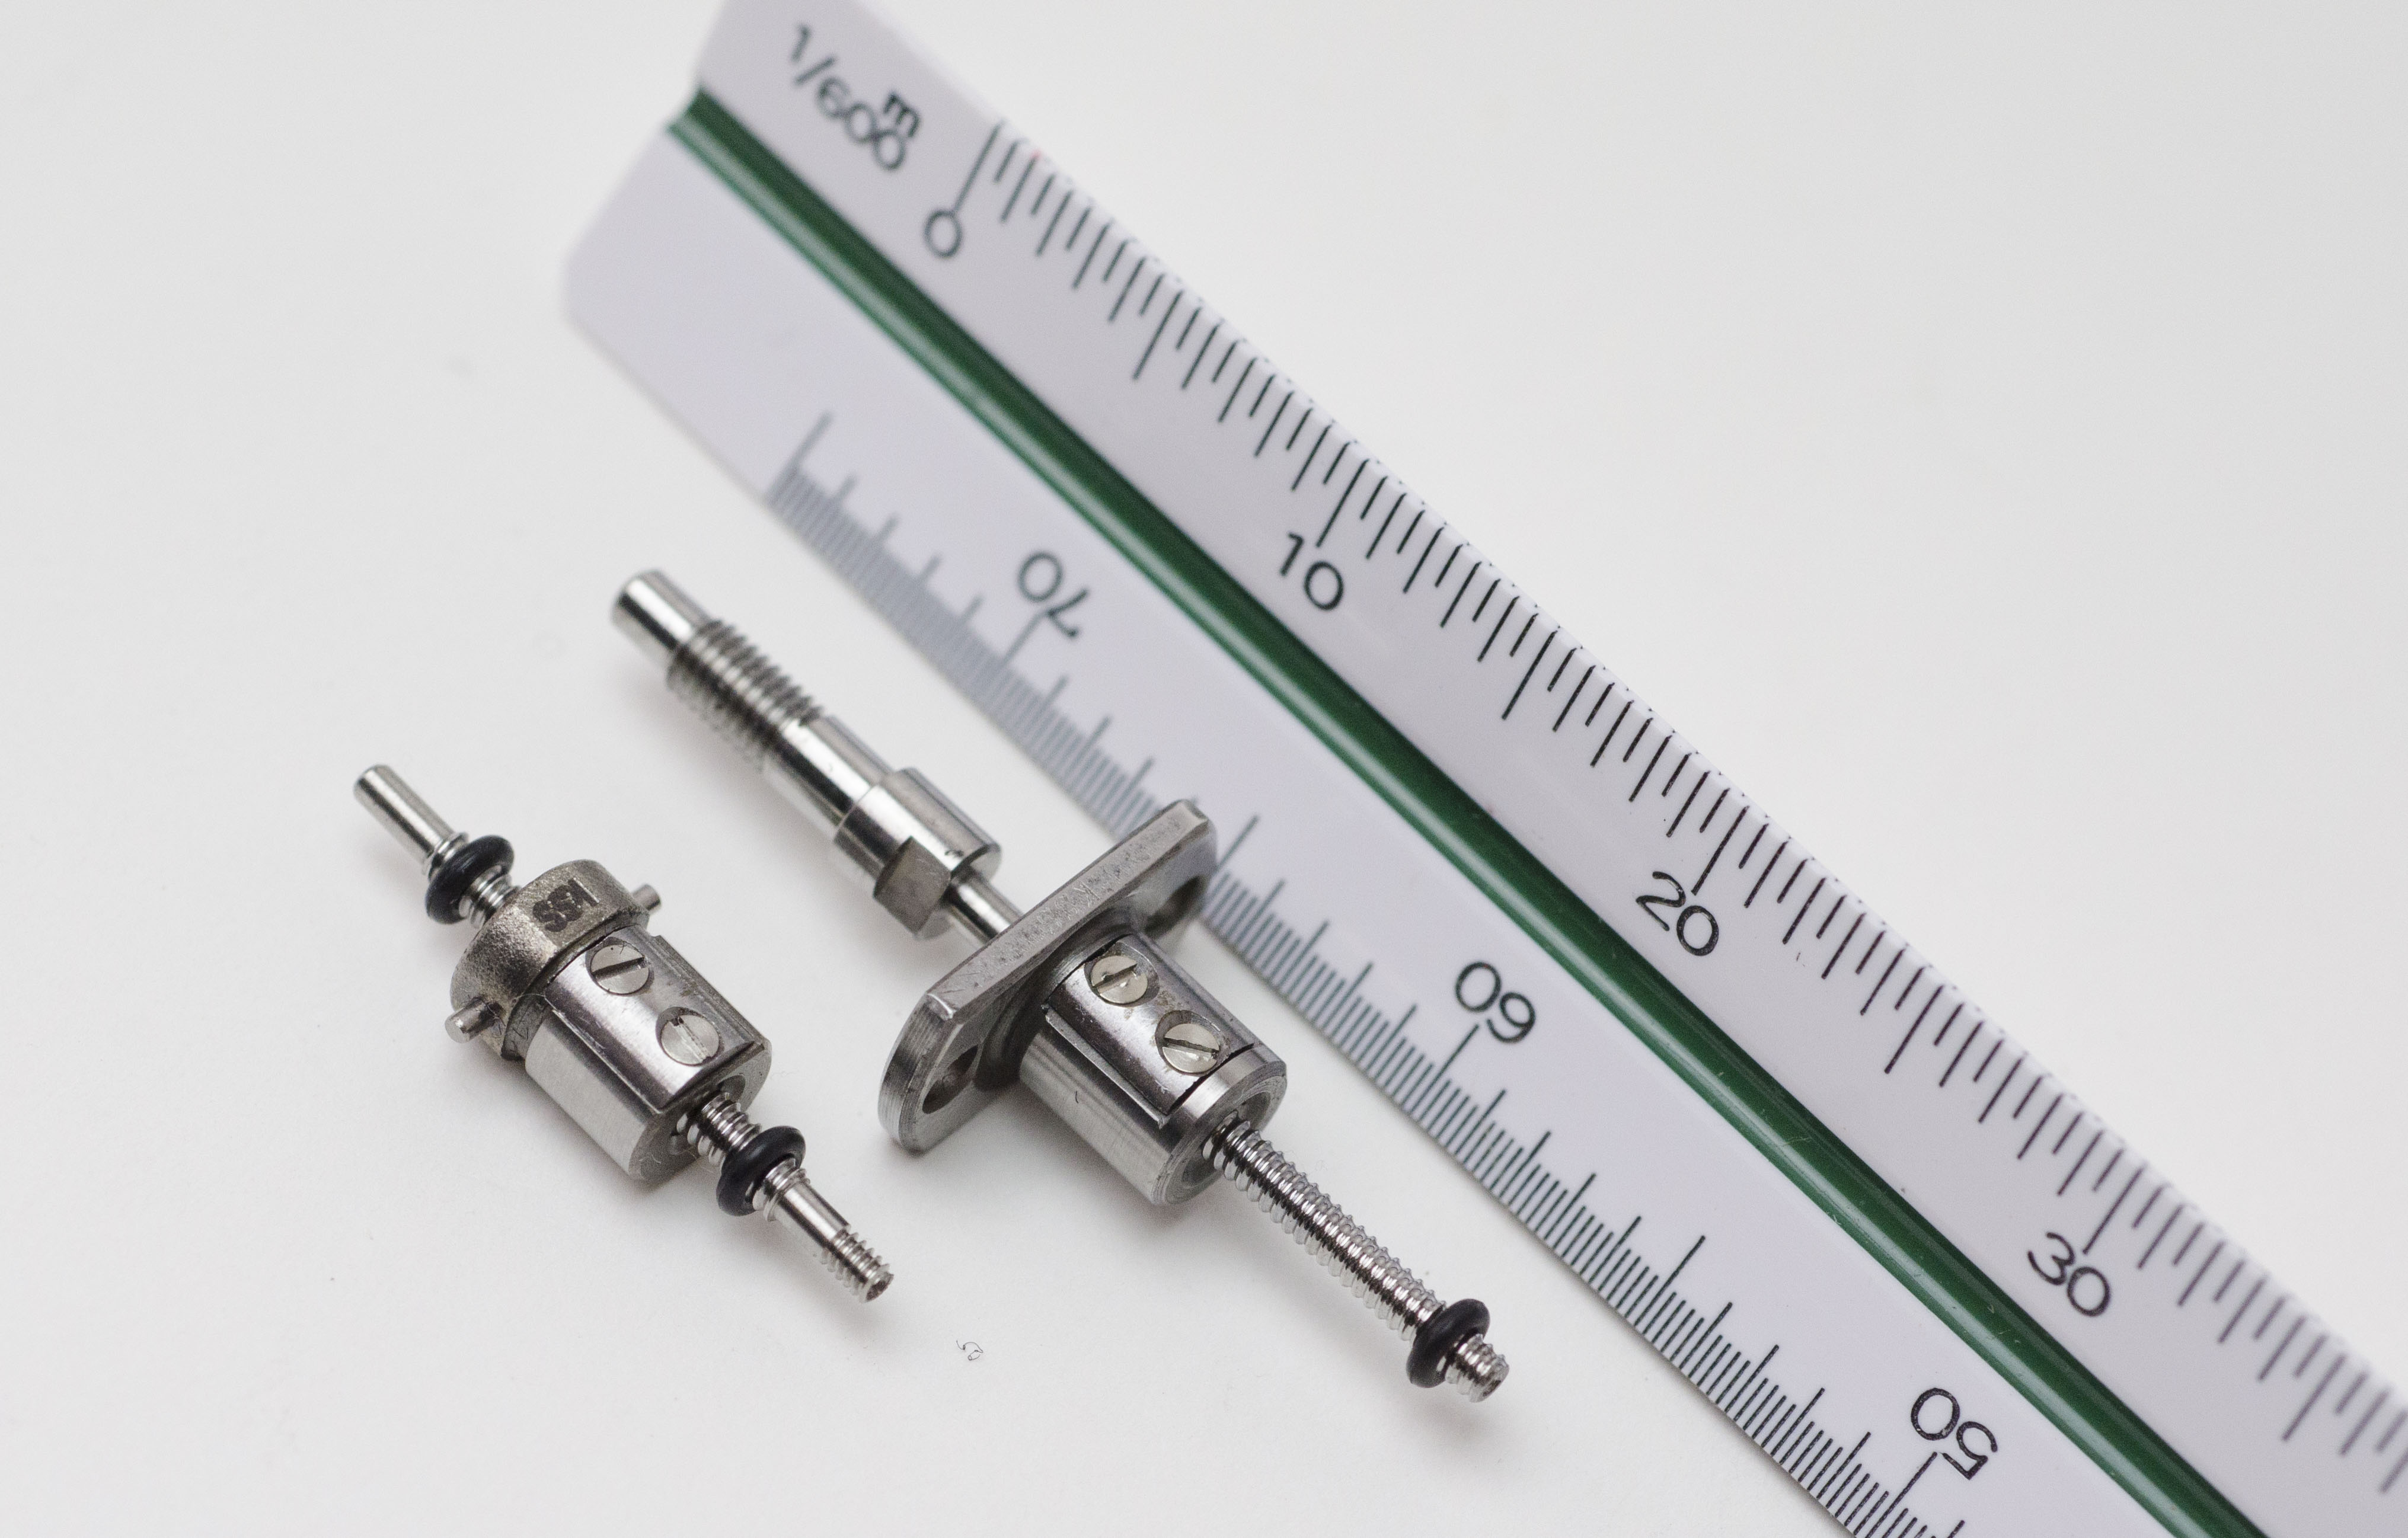 Interesting facts about precision ball screws